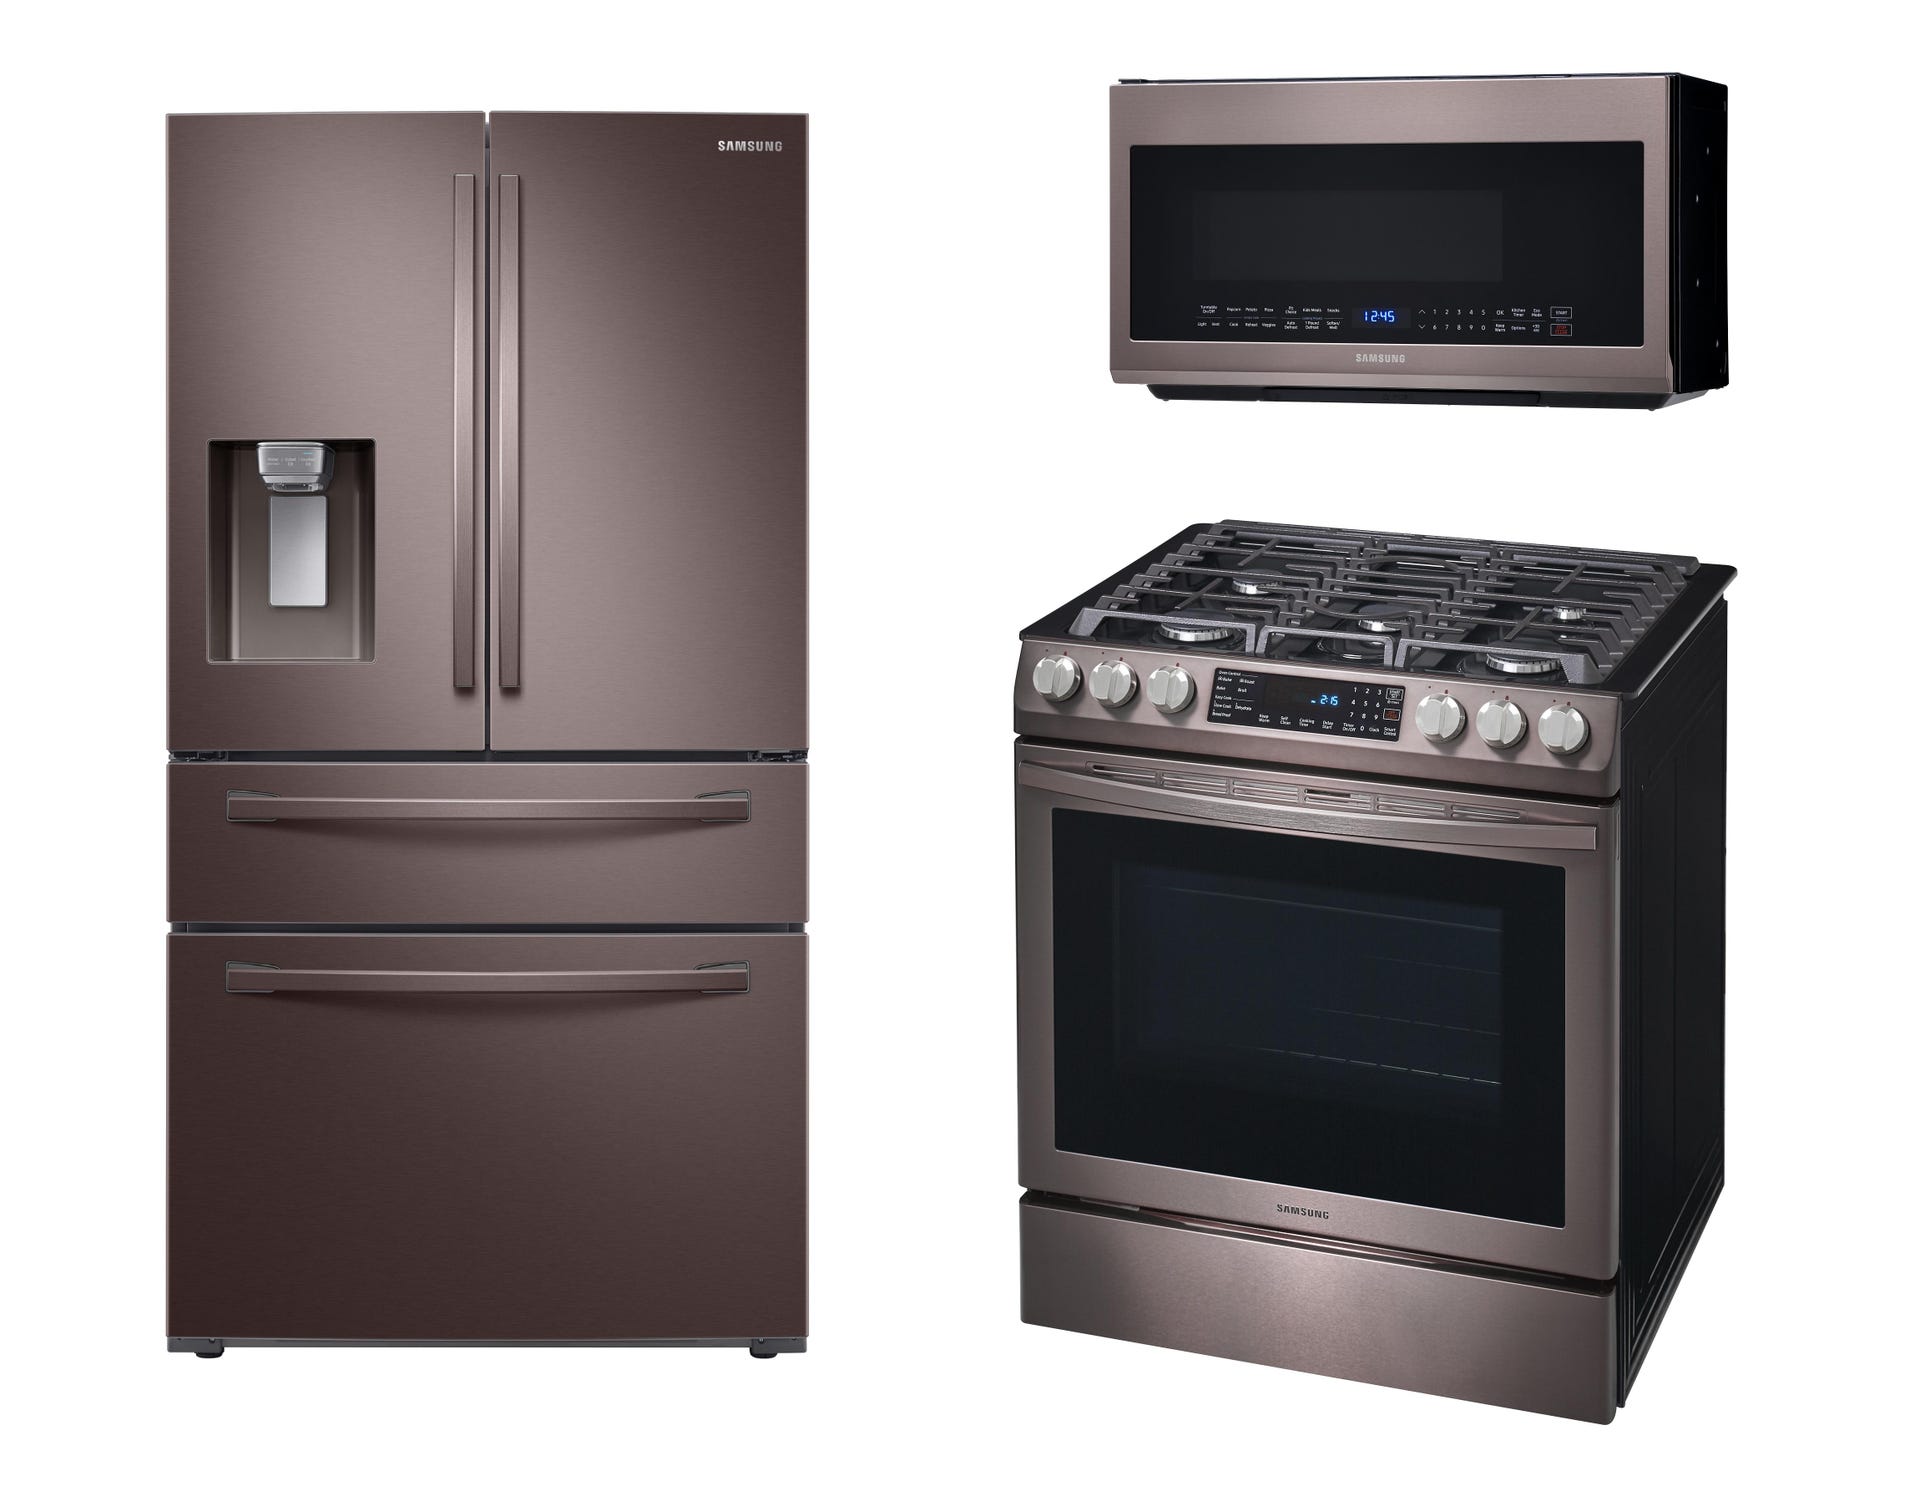 samsung-tuscan-stainless-steel-refrigerator-range-oven-microwave